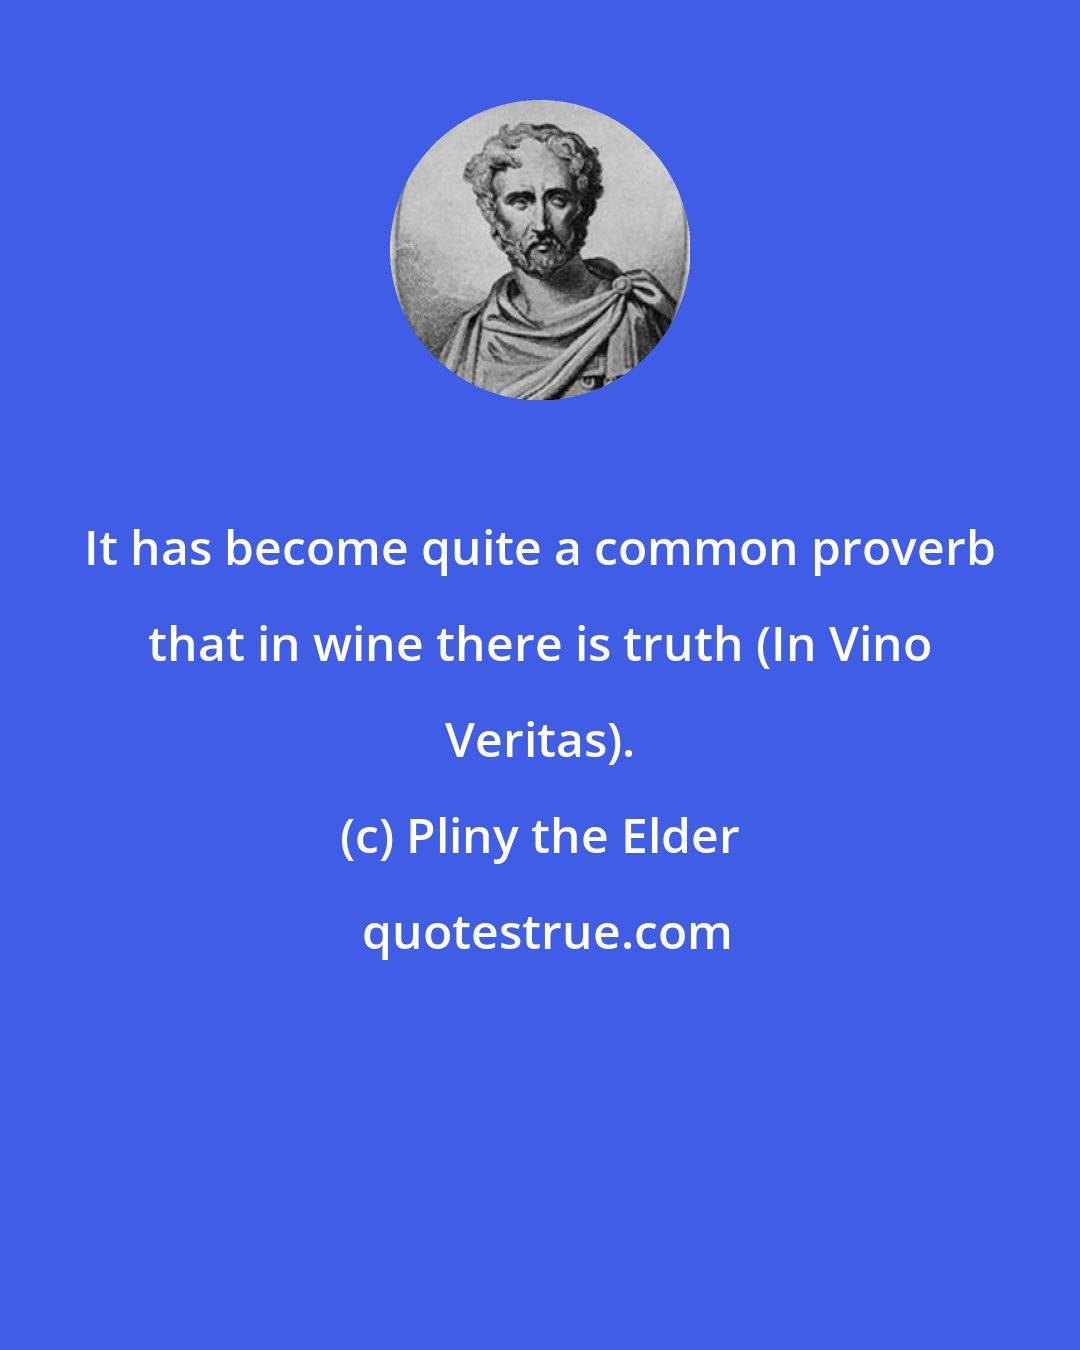 Pliny the Elder: It has become quite a common proverb that in wine there is truth (In Vino Veritas).